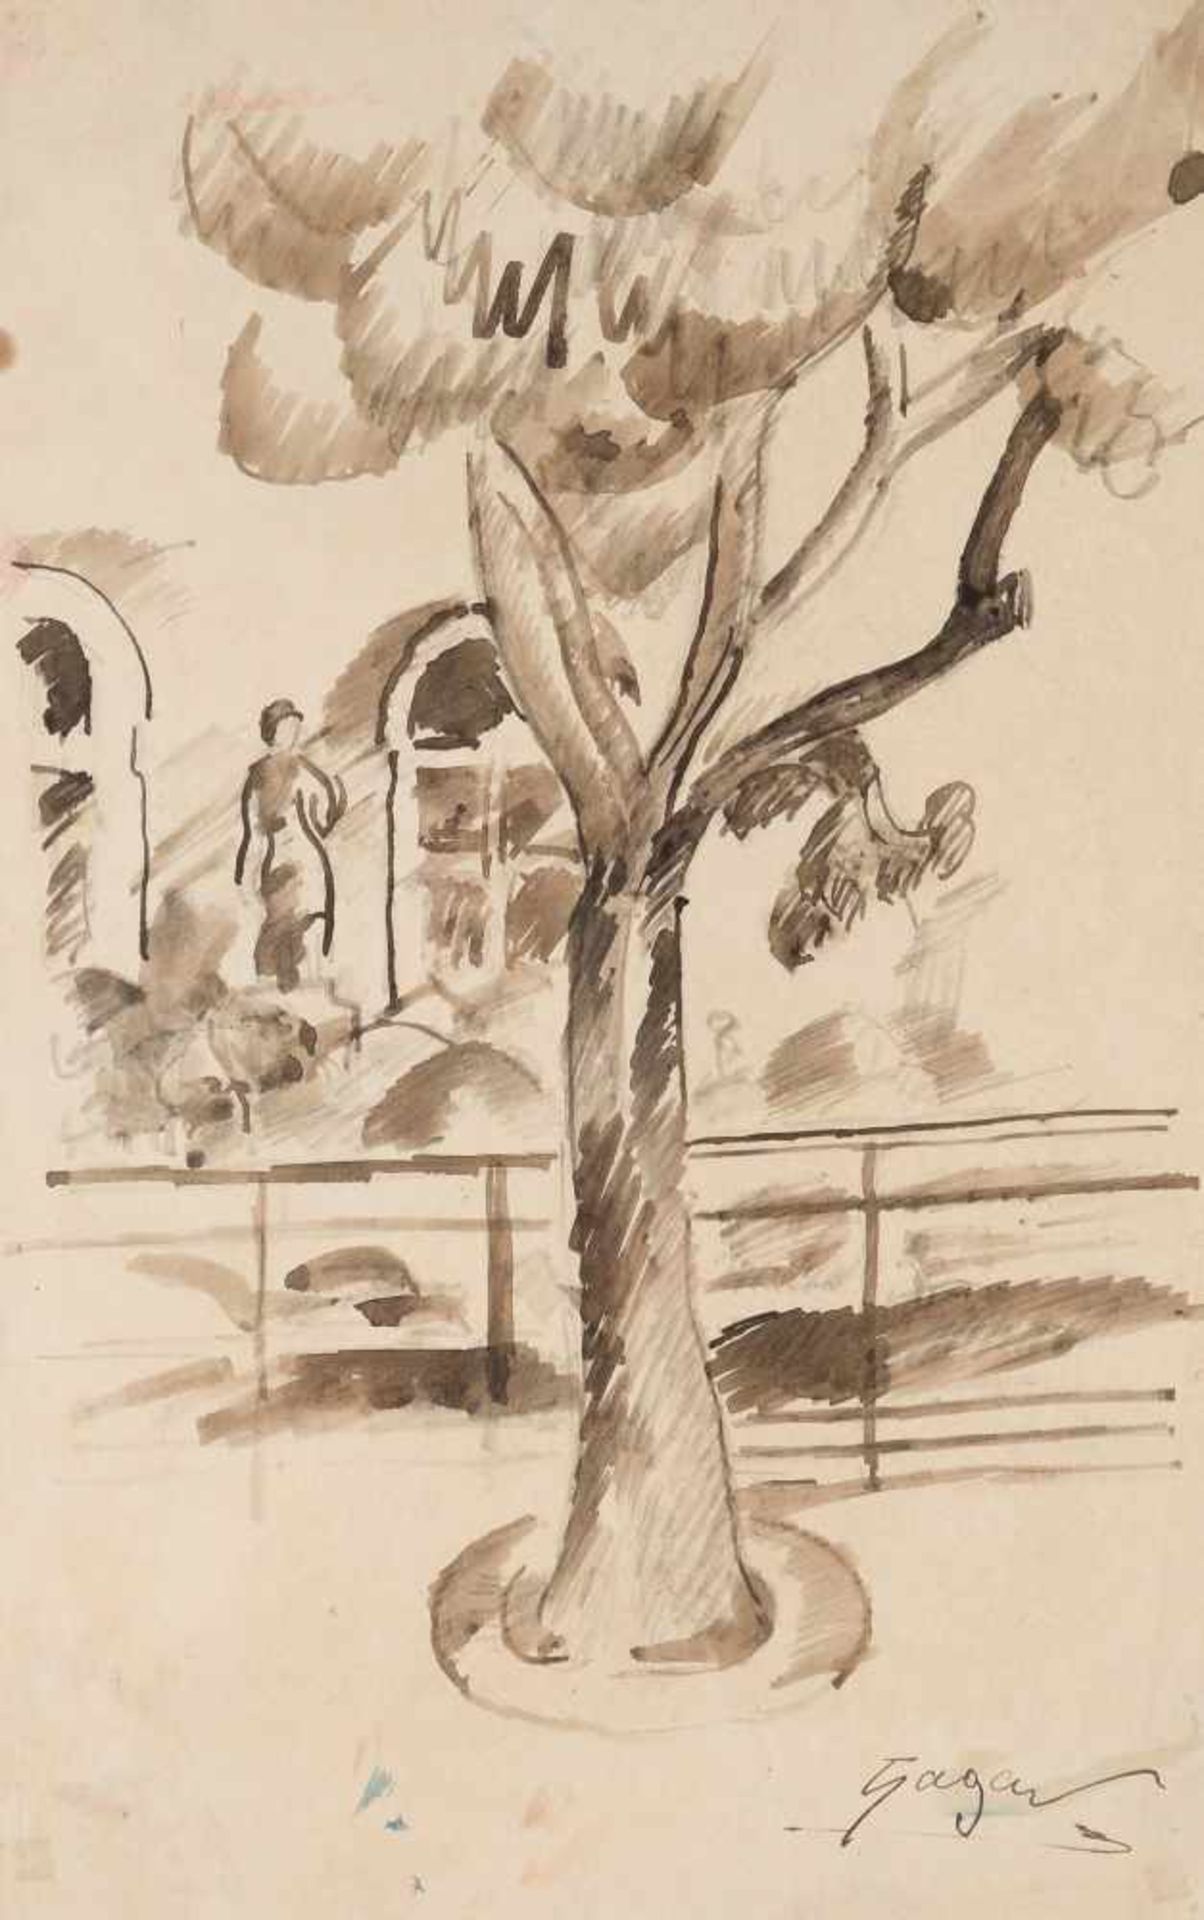 Celso Lagar (Ciudad Rodrigo, 1891 - Seville, 1966)Pencil and watercolour drawing on paper. Signed.